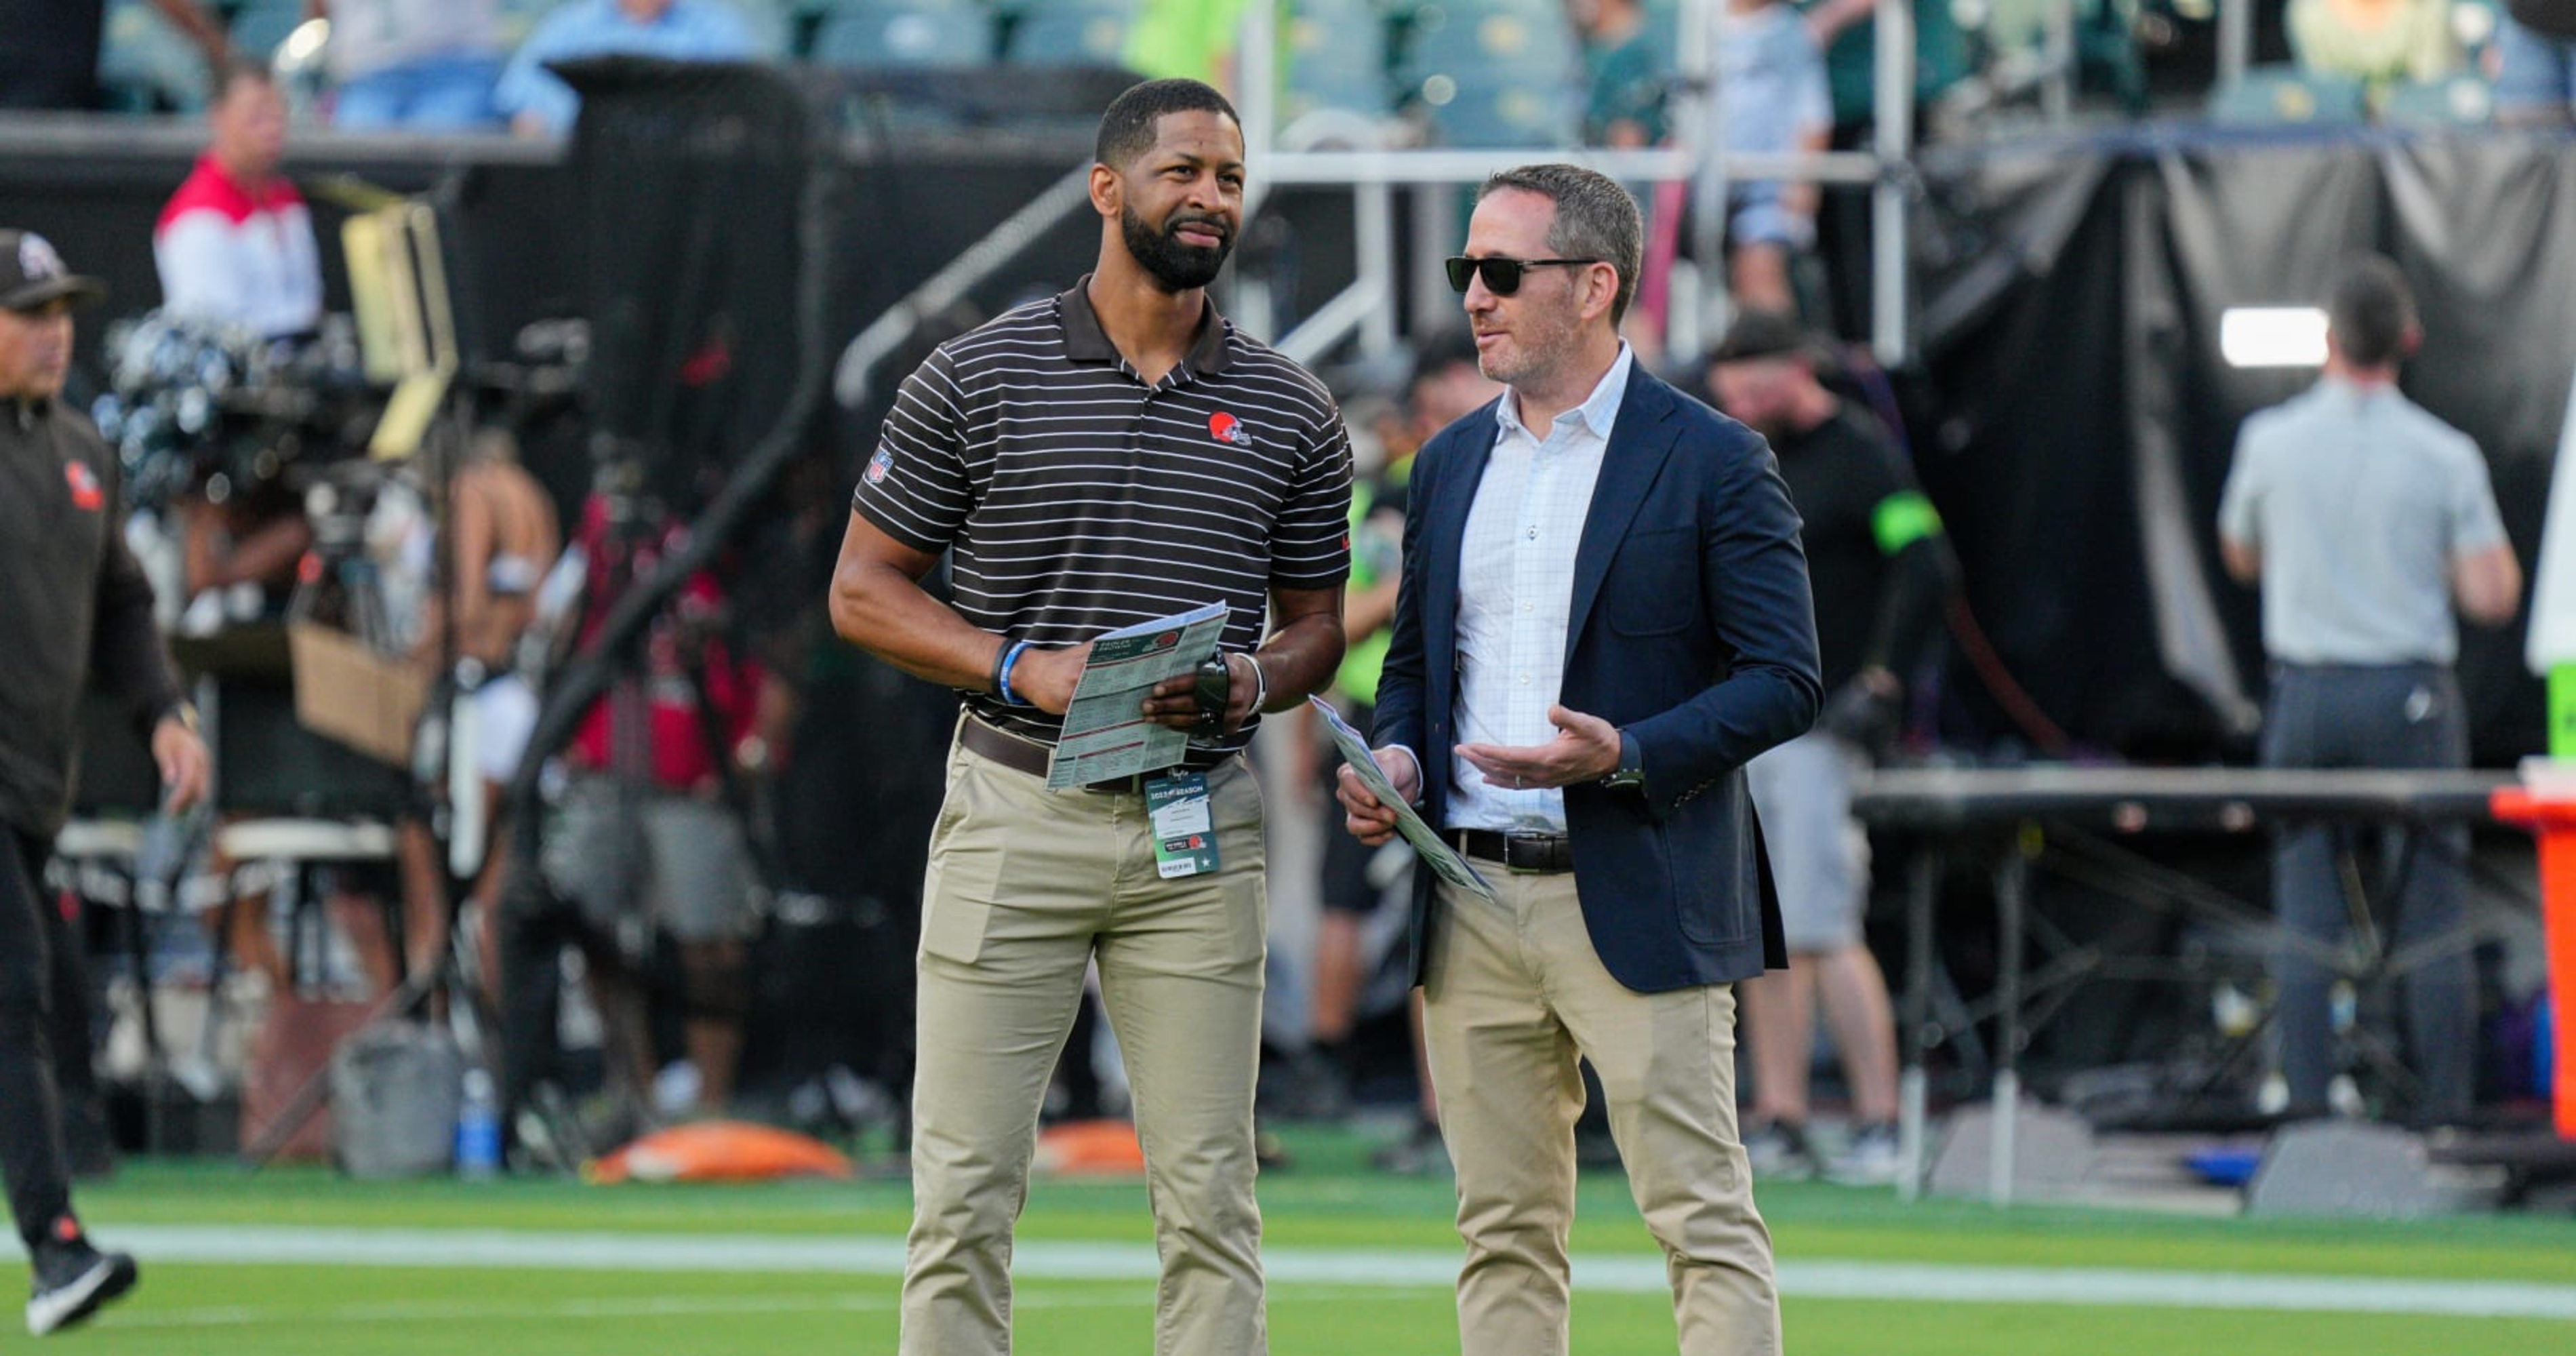 49ers news: Kyle Shanahan talks about his excitement for Banks and Burford;  hopes McGlinchey returns Week 1 - Niners Nation